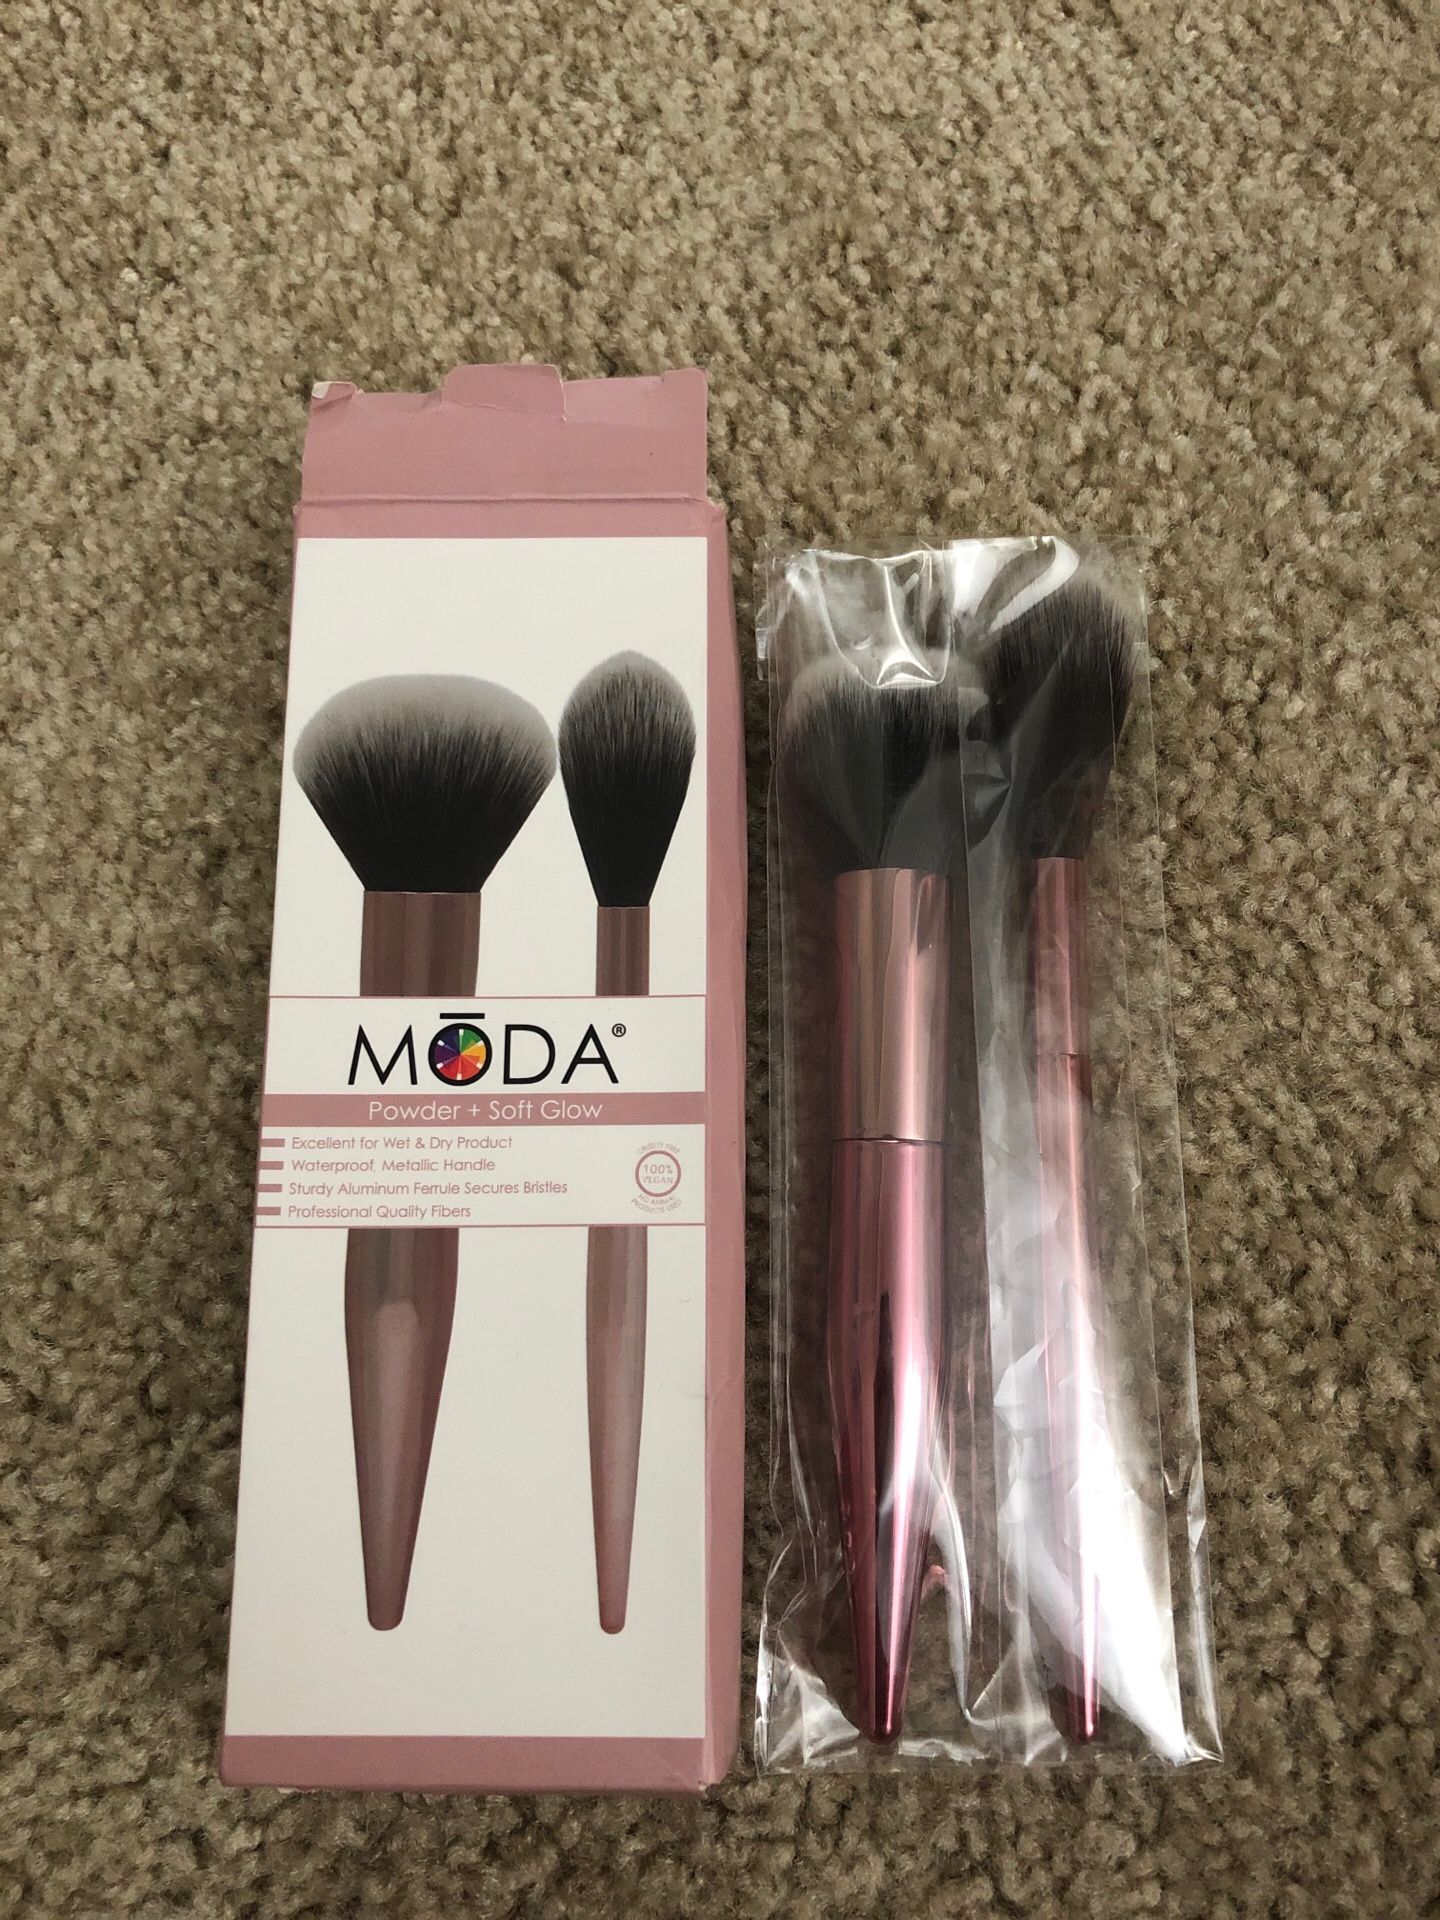 Moda - Makeup brushes for Powder and Soft Glow